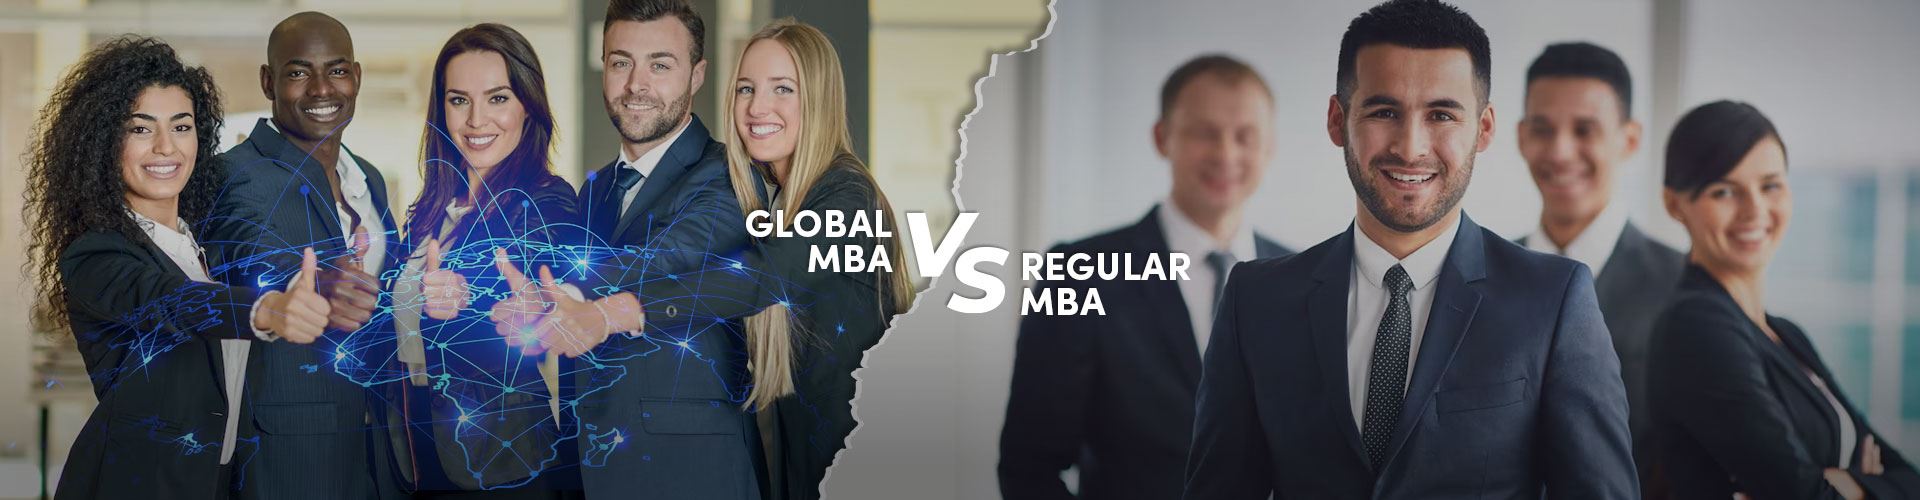 Global MBA vs Regular MBA: What's the Difference?